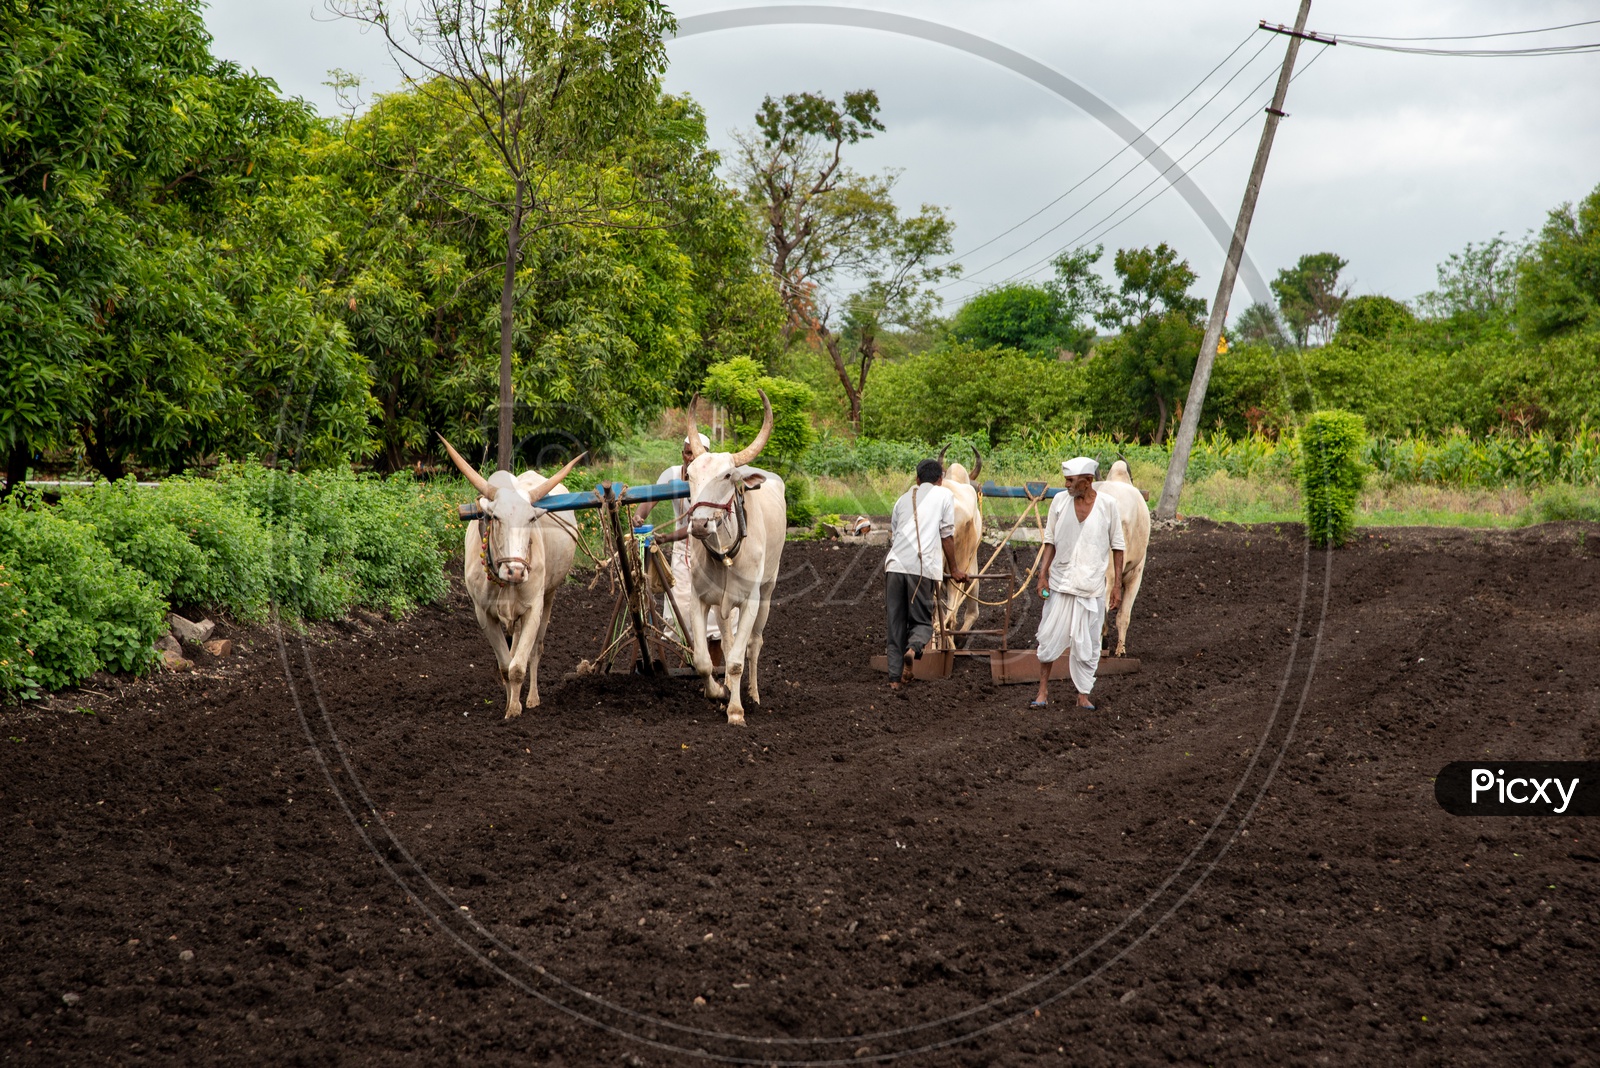 Traditional farming using bullocks and ploughs in a village in Maharashtra